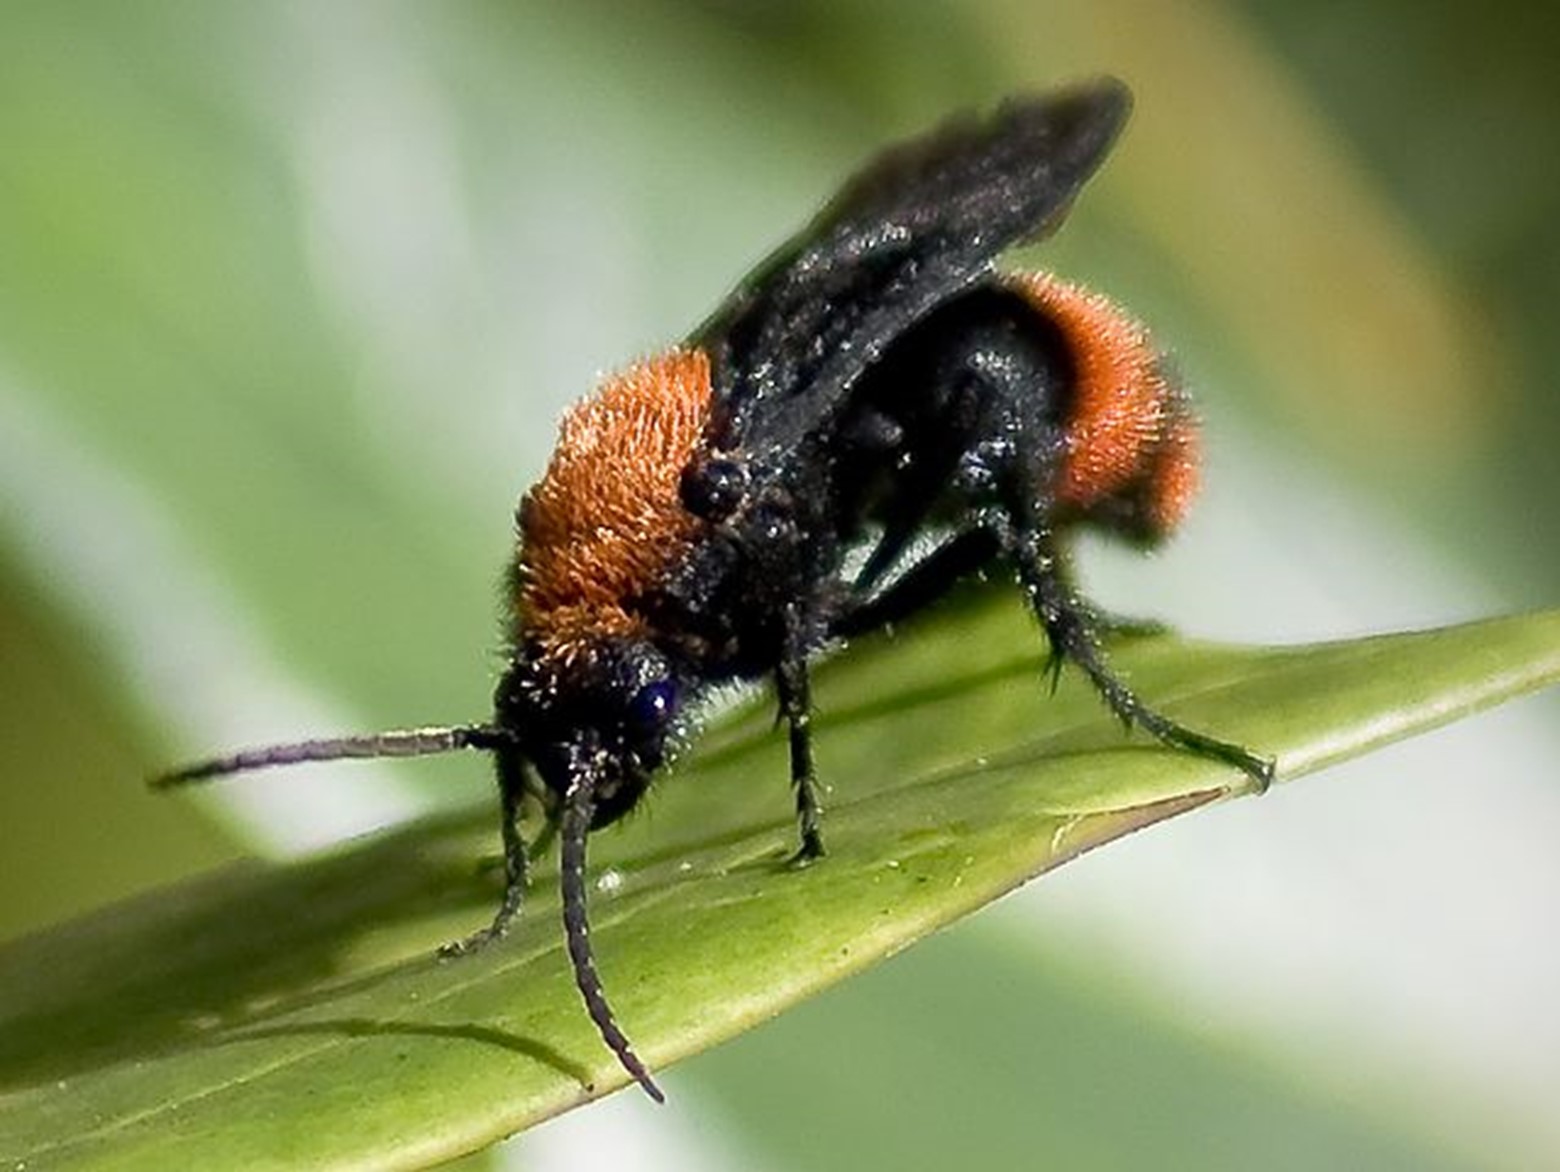 Male red velvet ant with lighter coloration and a set of dark wings, perched on a leaf